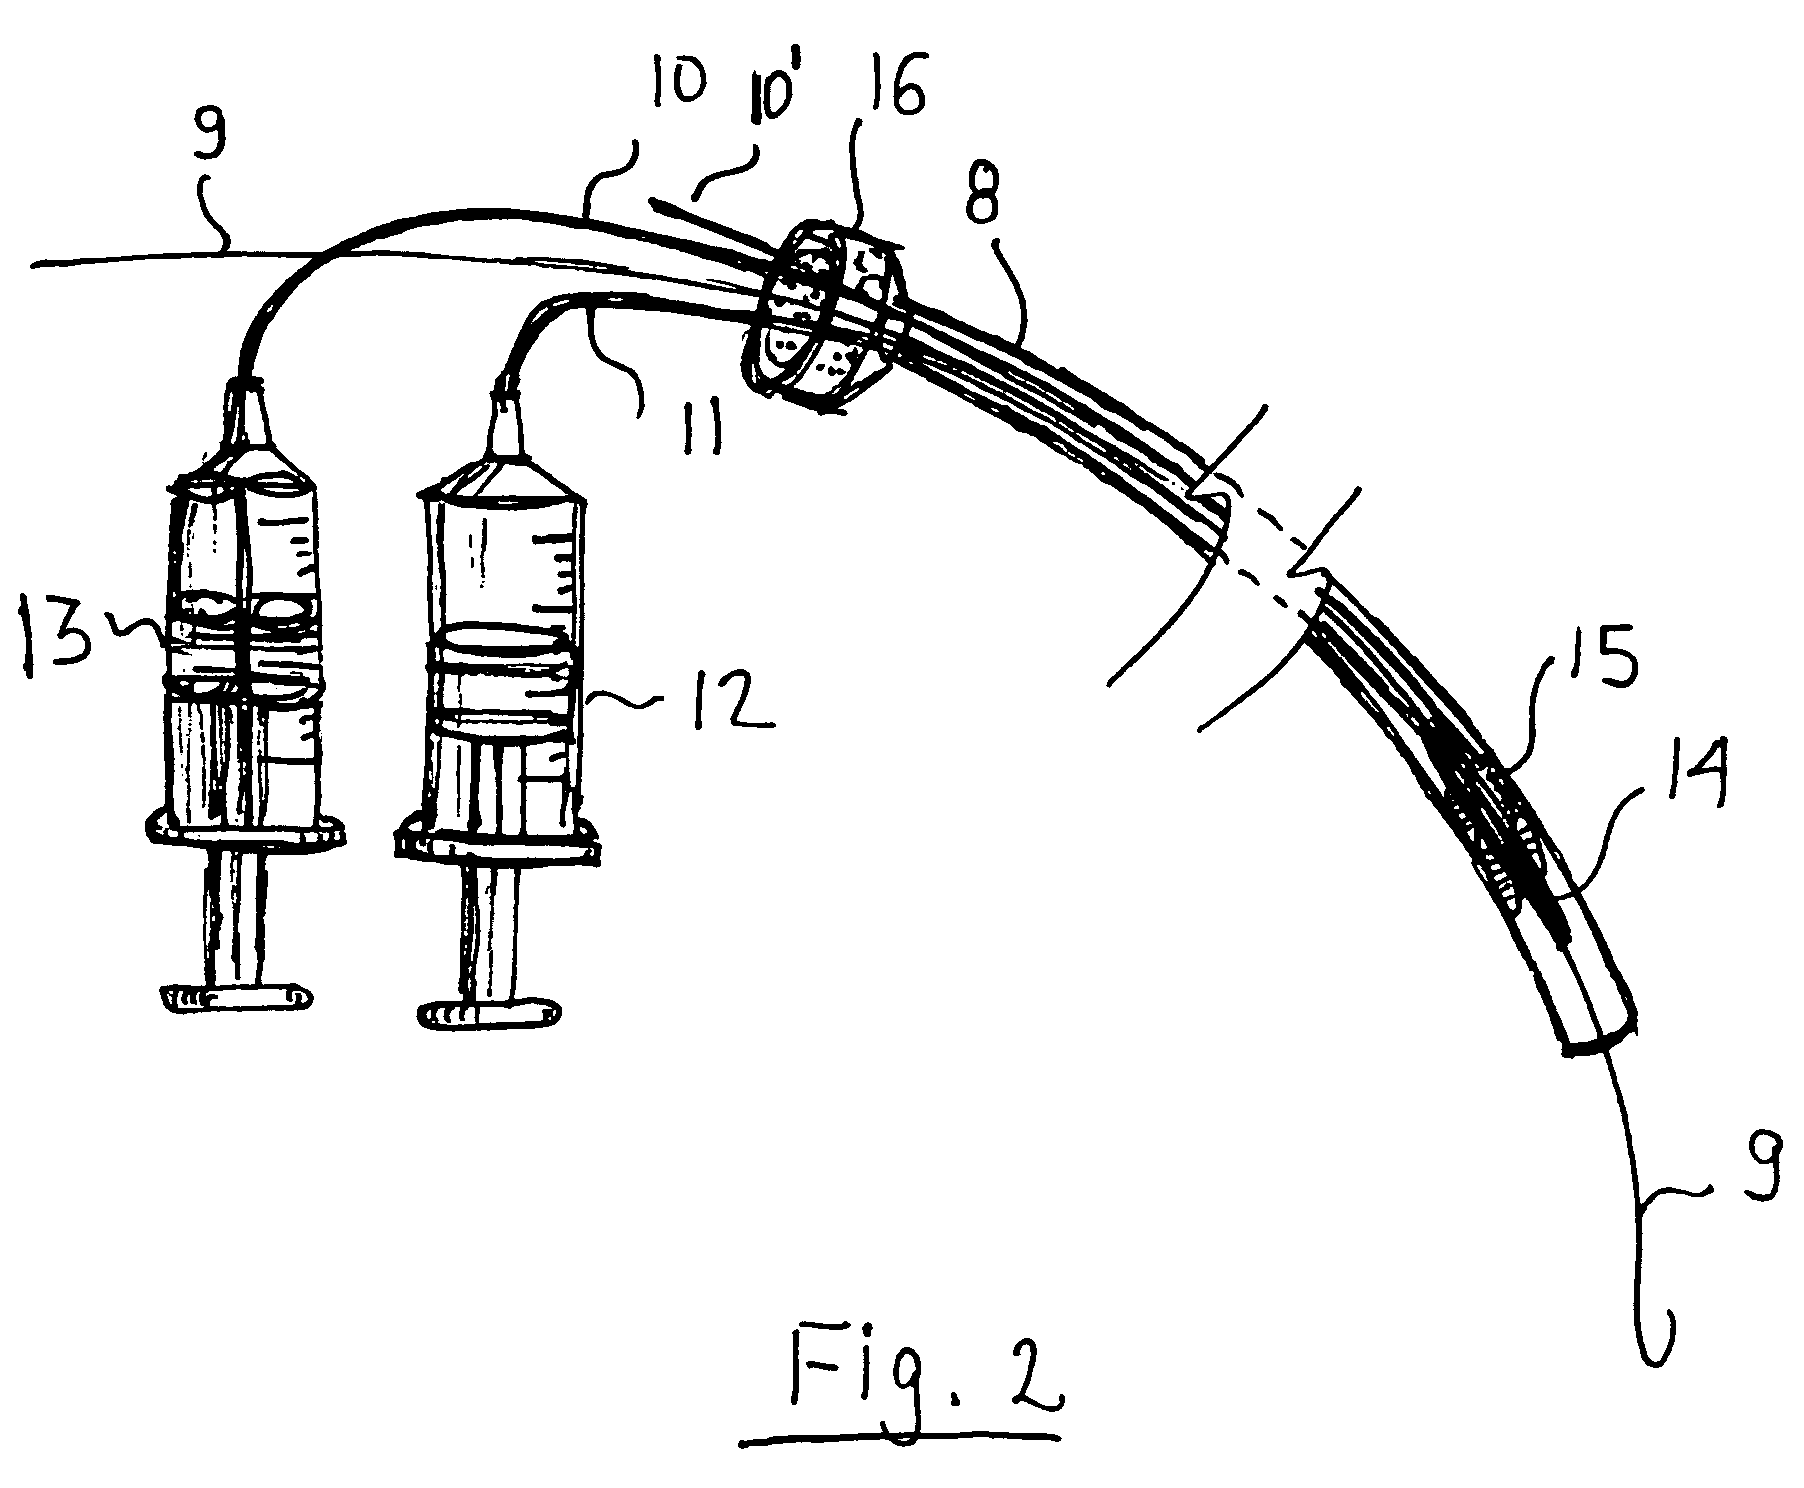 Inflatable artificial valve